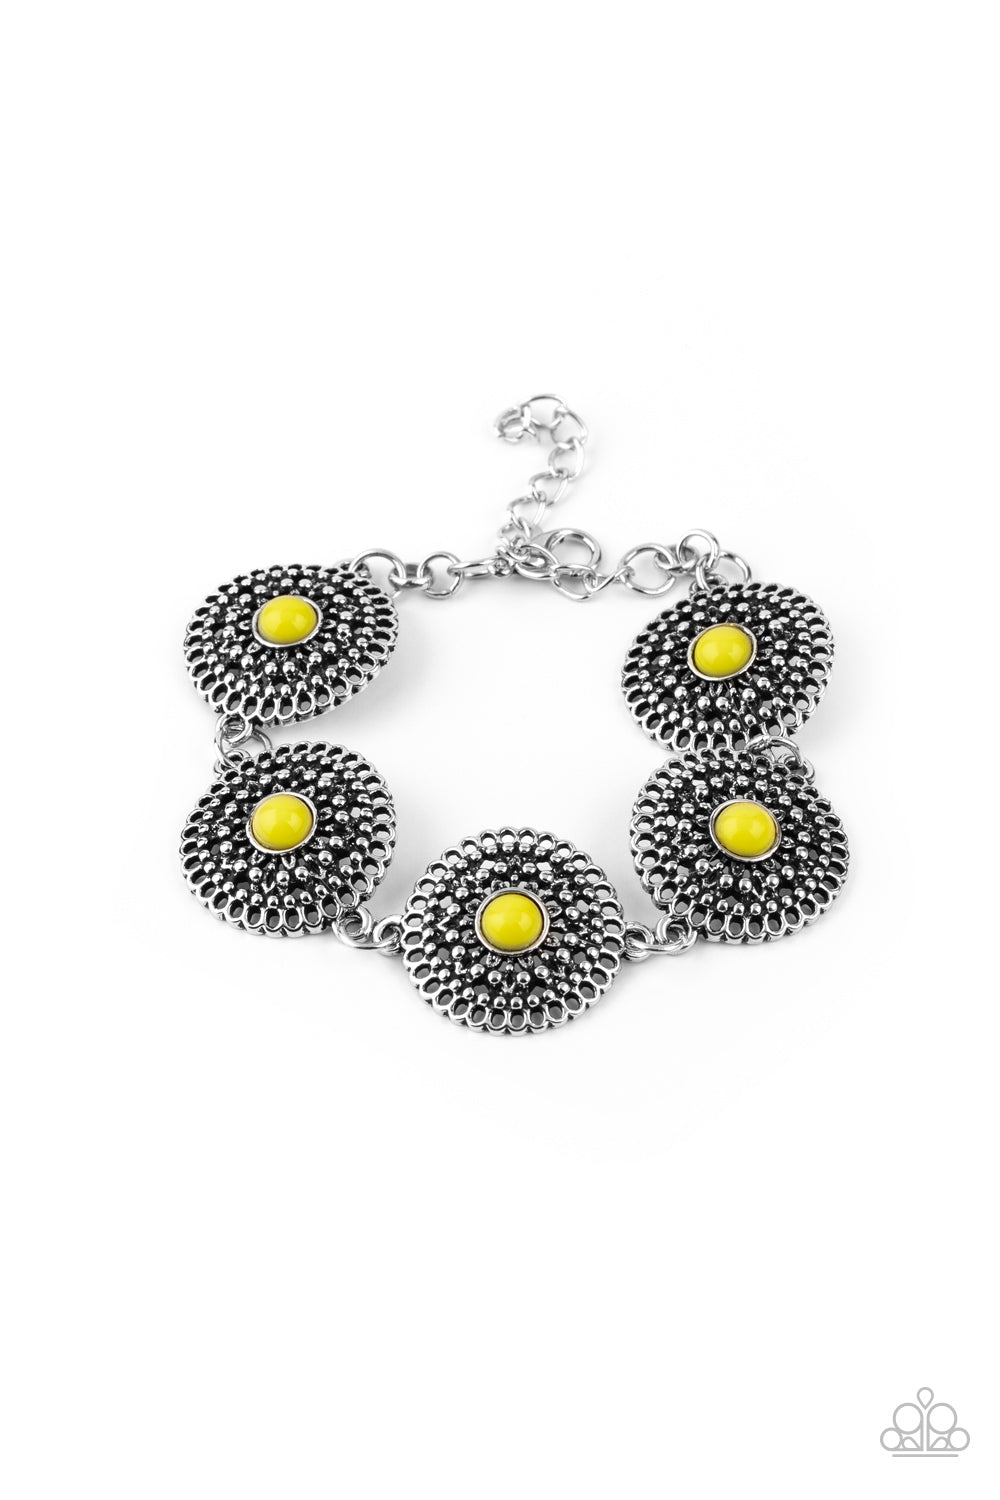 Mojave Mandalas - Yellow and Silver Bracelet - Paparazzi Accessories - Dotted with dainty yellow beaded centers, shimmery studded silver floral frames delicately link around the wrist for a colorfully whimsical look. Features an adjustable clasp closure. Sold as one individual bracelet.